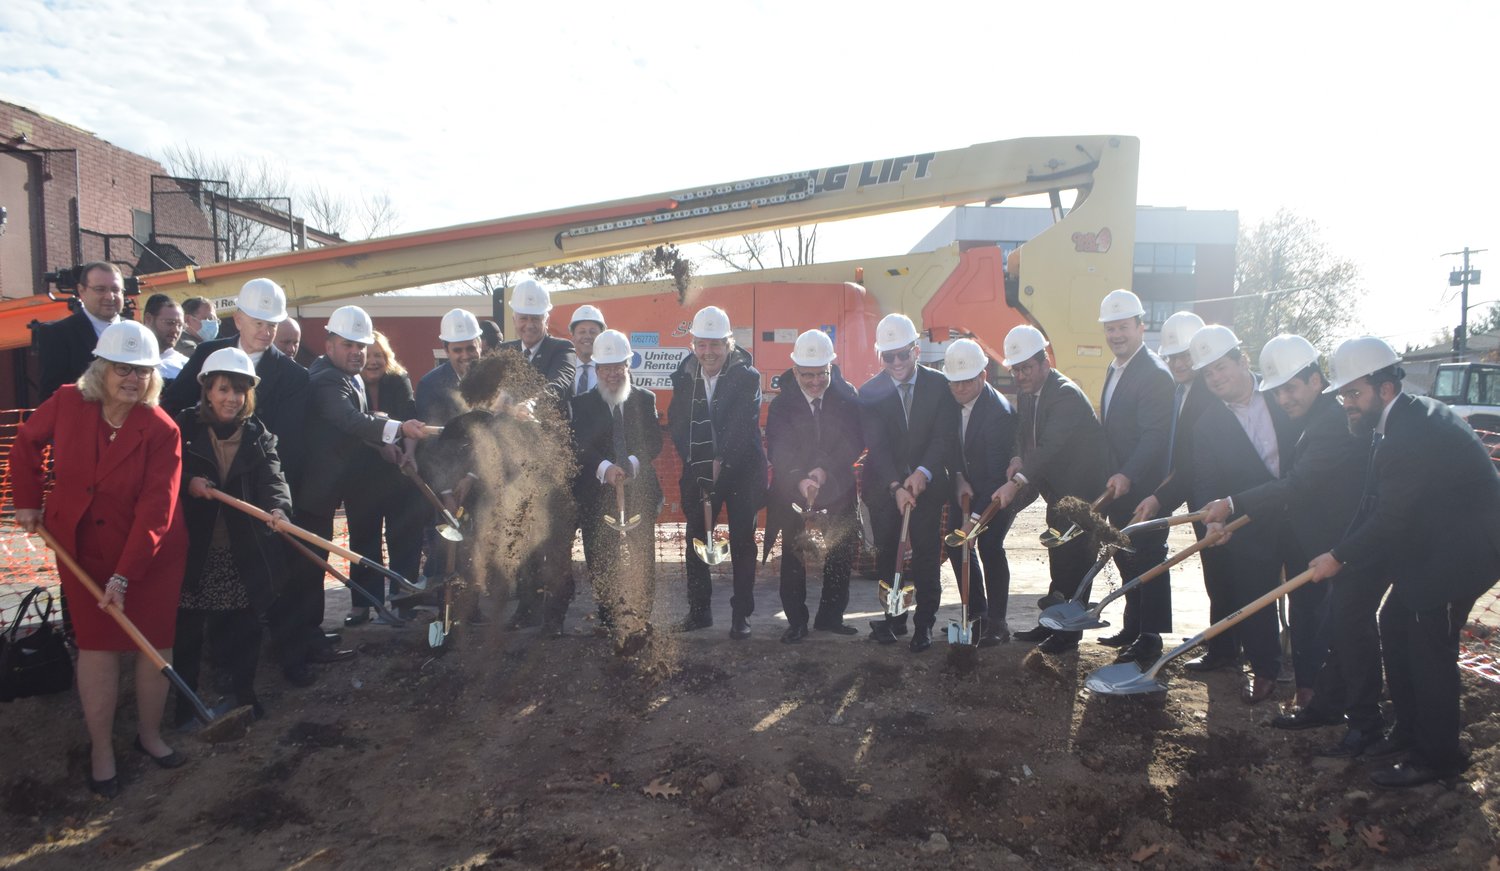 Dirt was flying with the ceremonial groundbreaking for the new Yeshiva of South Shore school building.